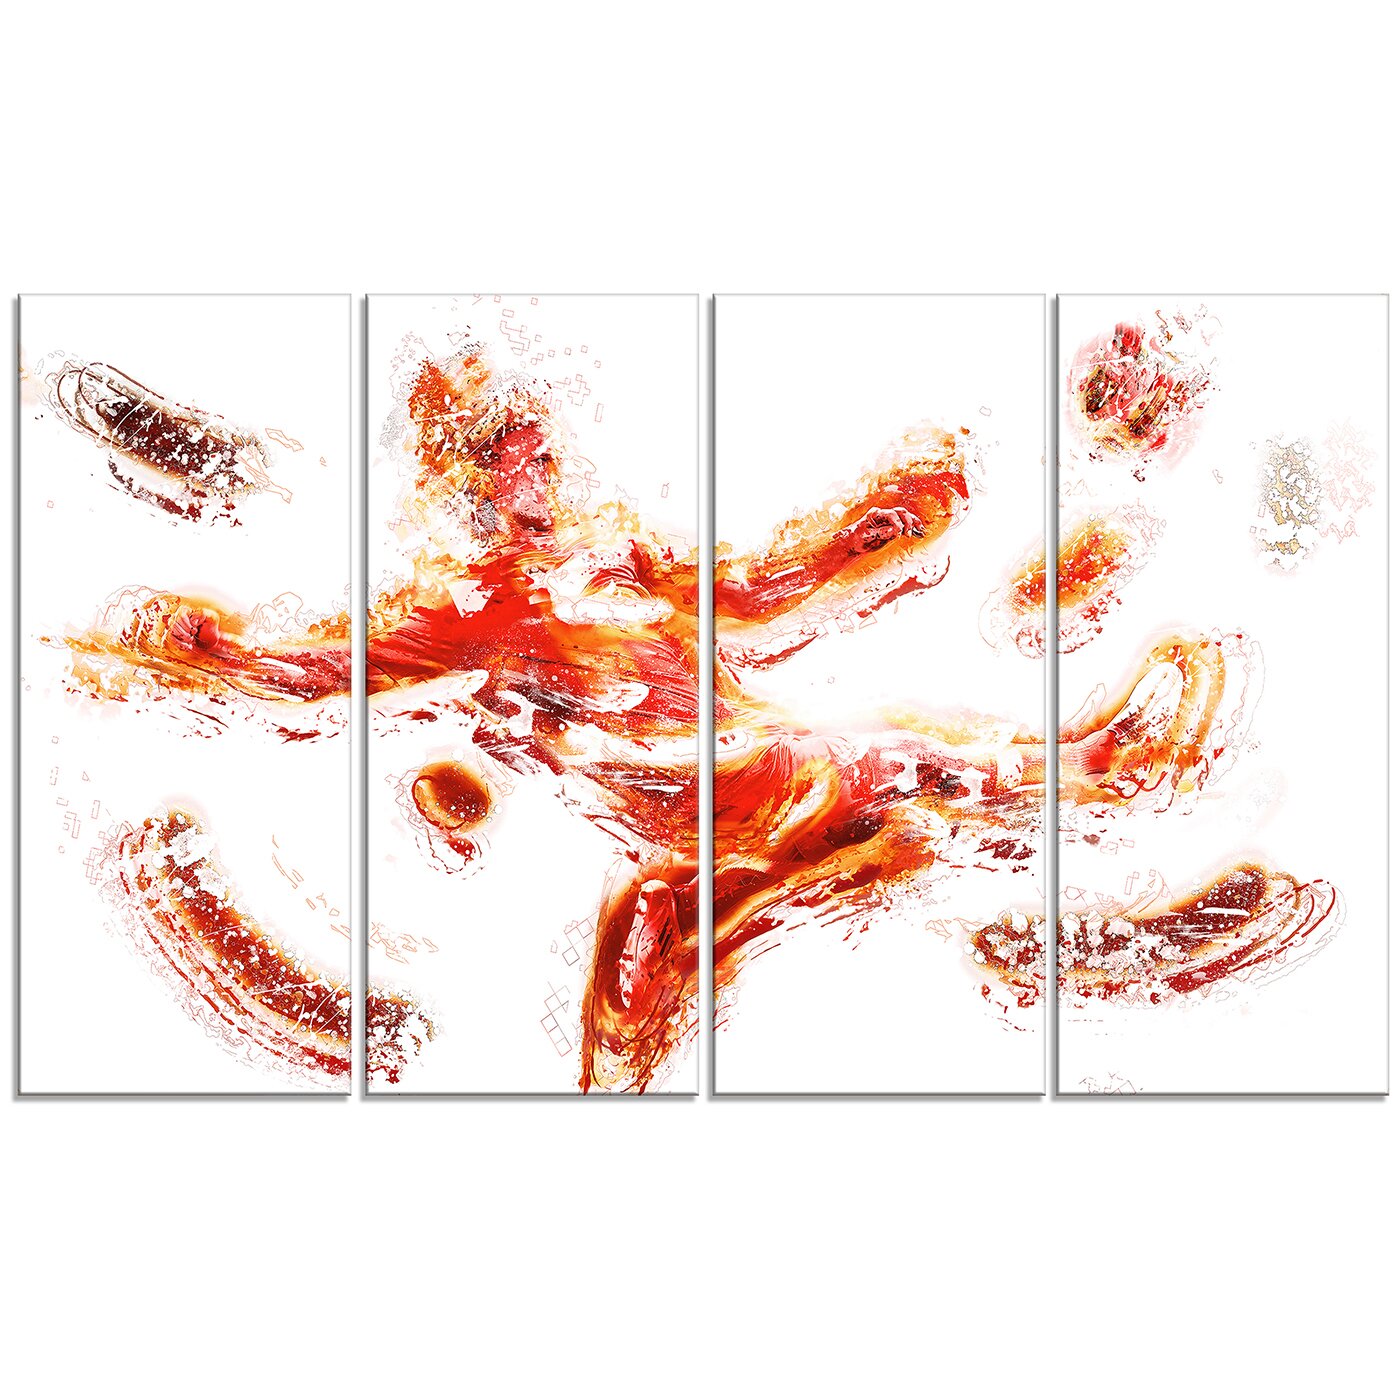 Design Art Sports in Motion 4 Piece Graphic Art on Wrapped Canvas Set